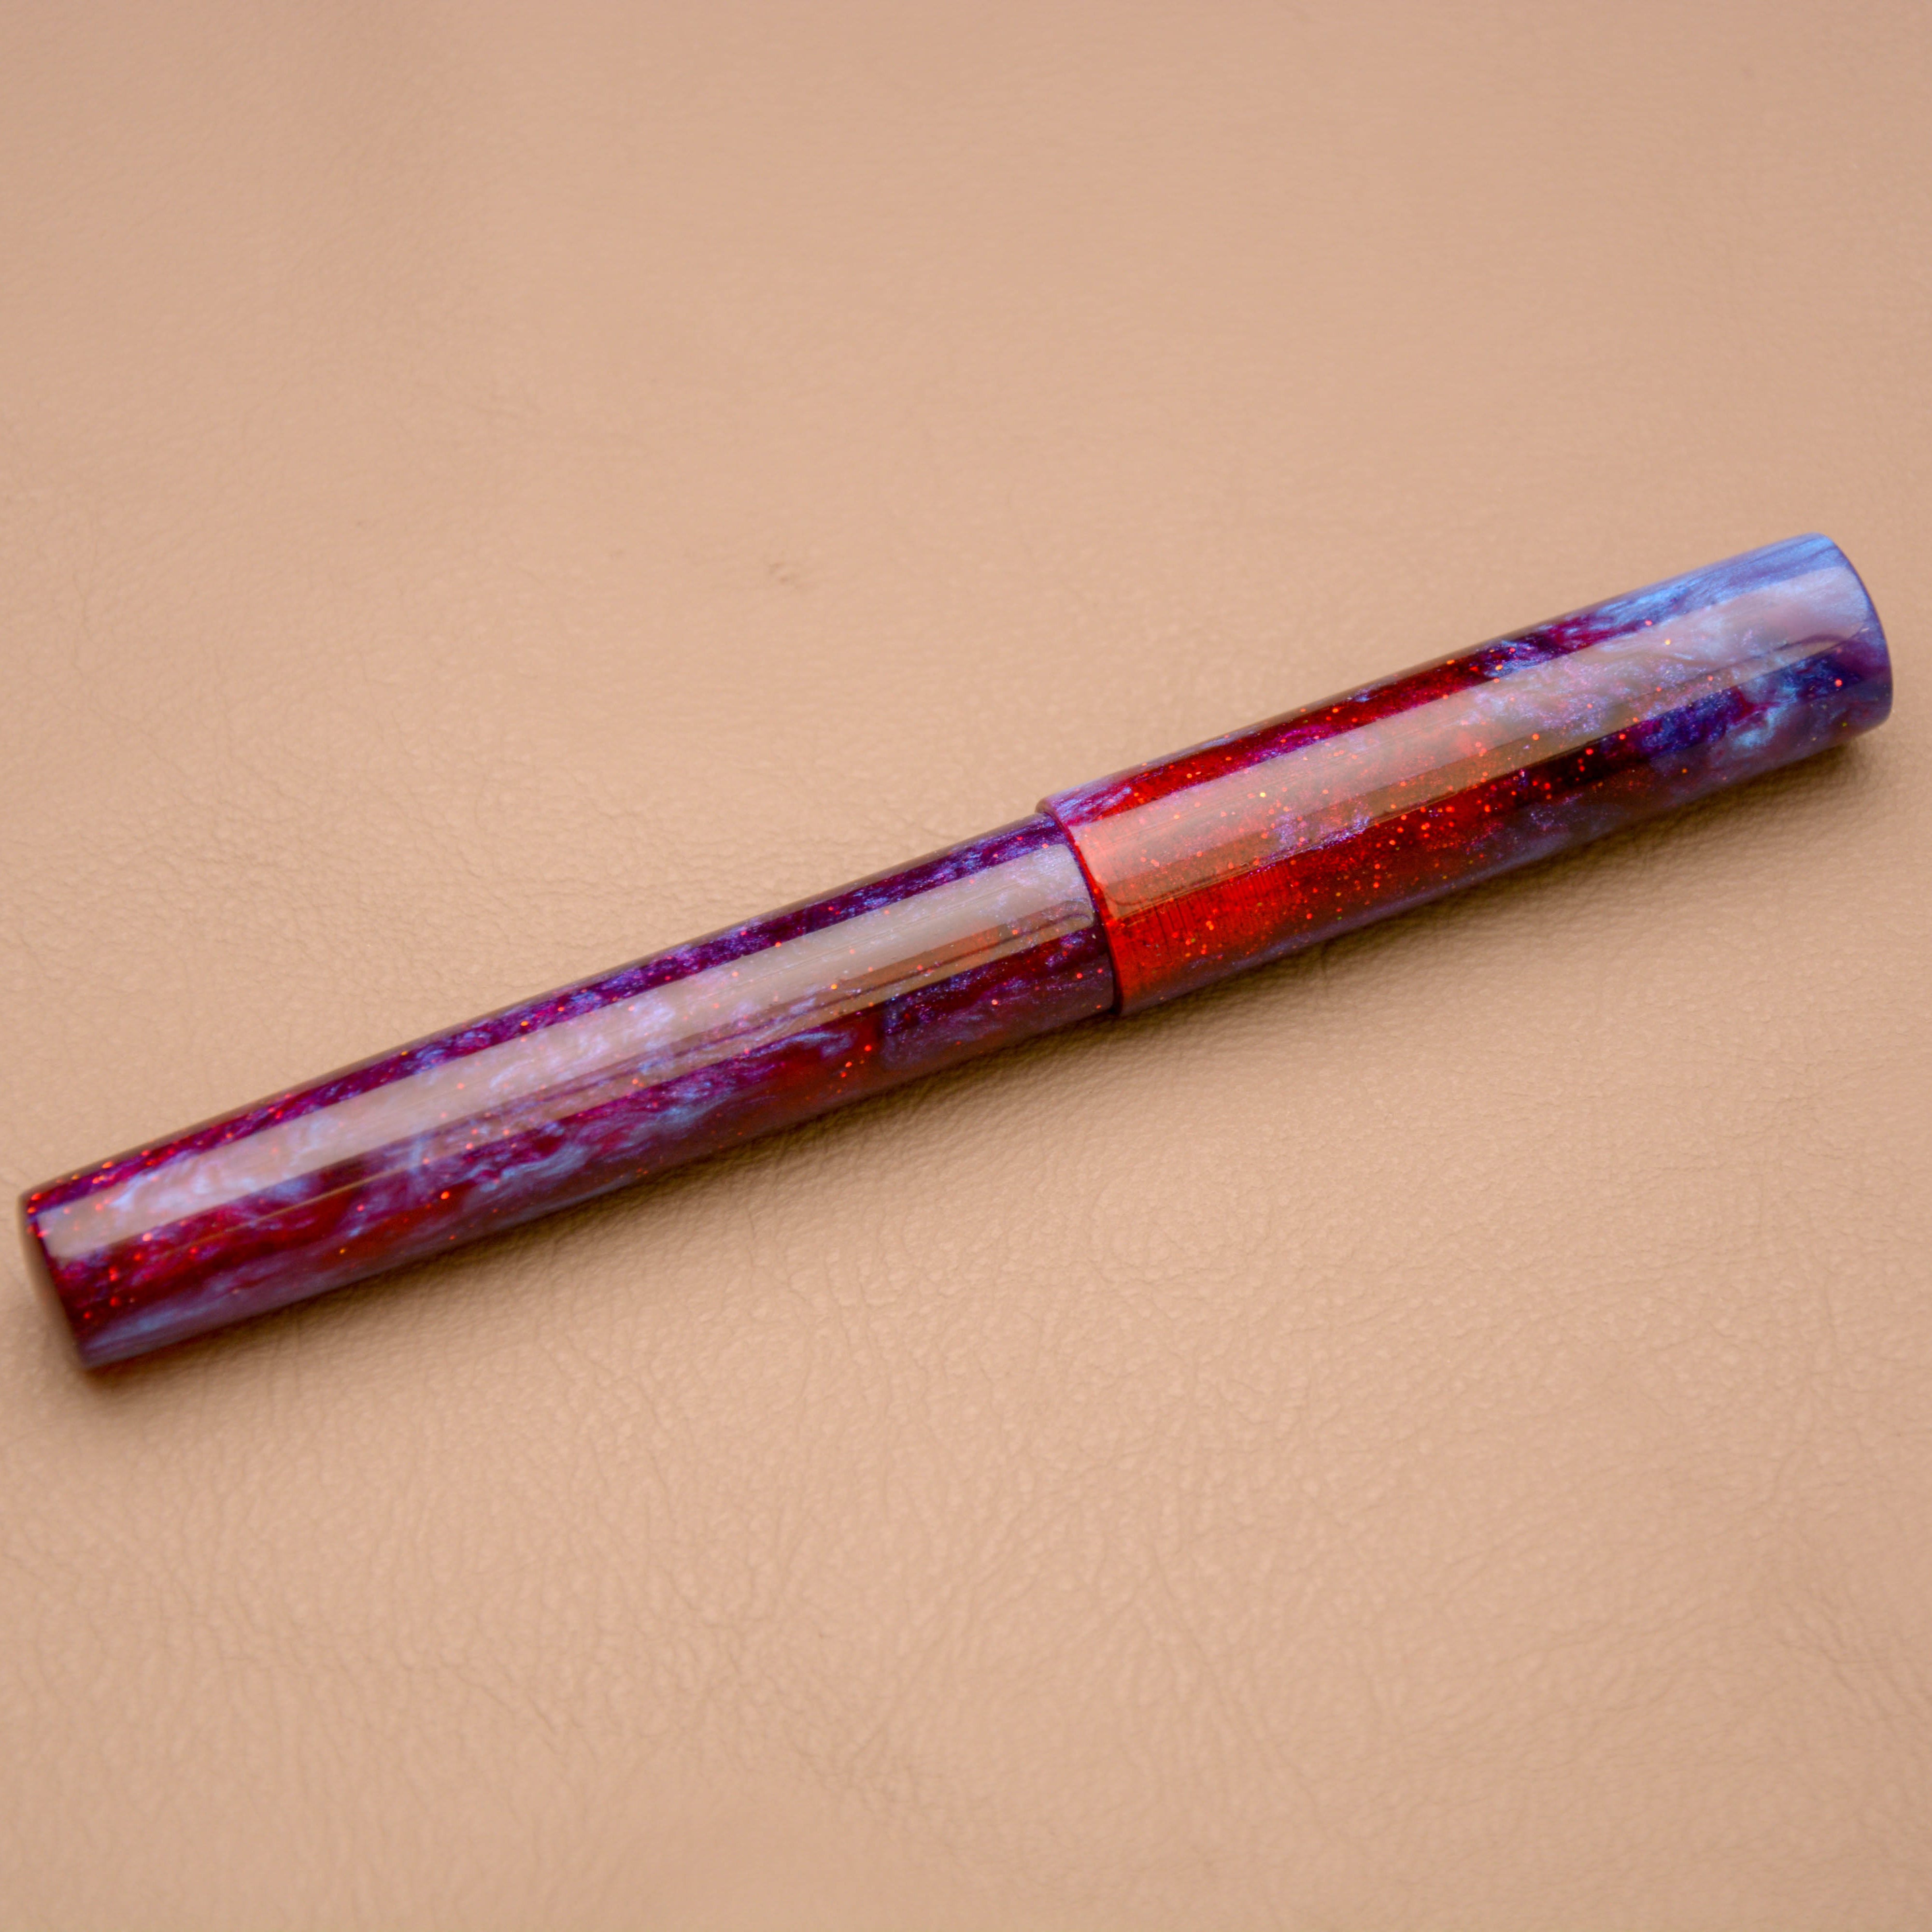 Fountain Pen - Bock #6 - 13 mm - In house cast with reds, purple and blue with glitters